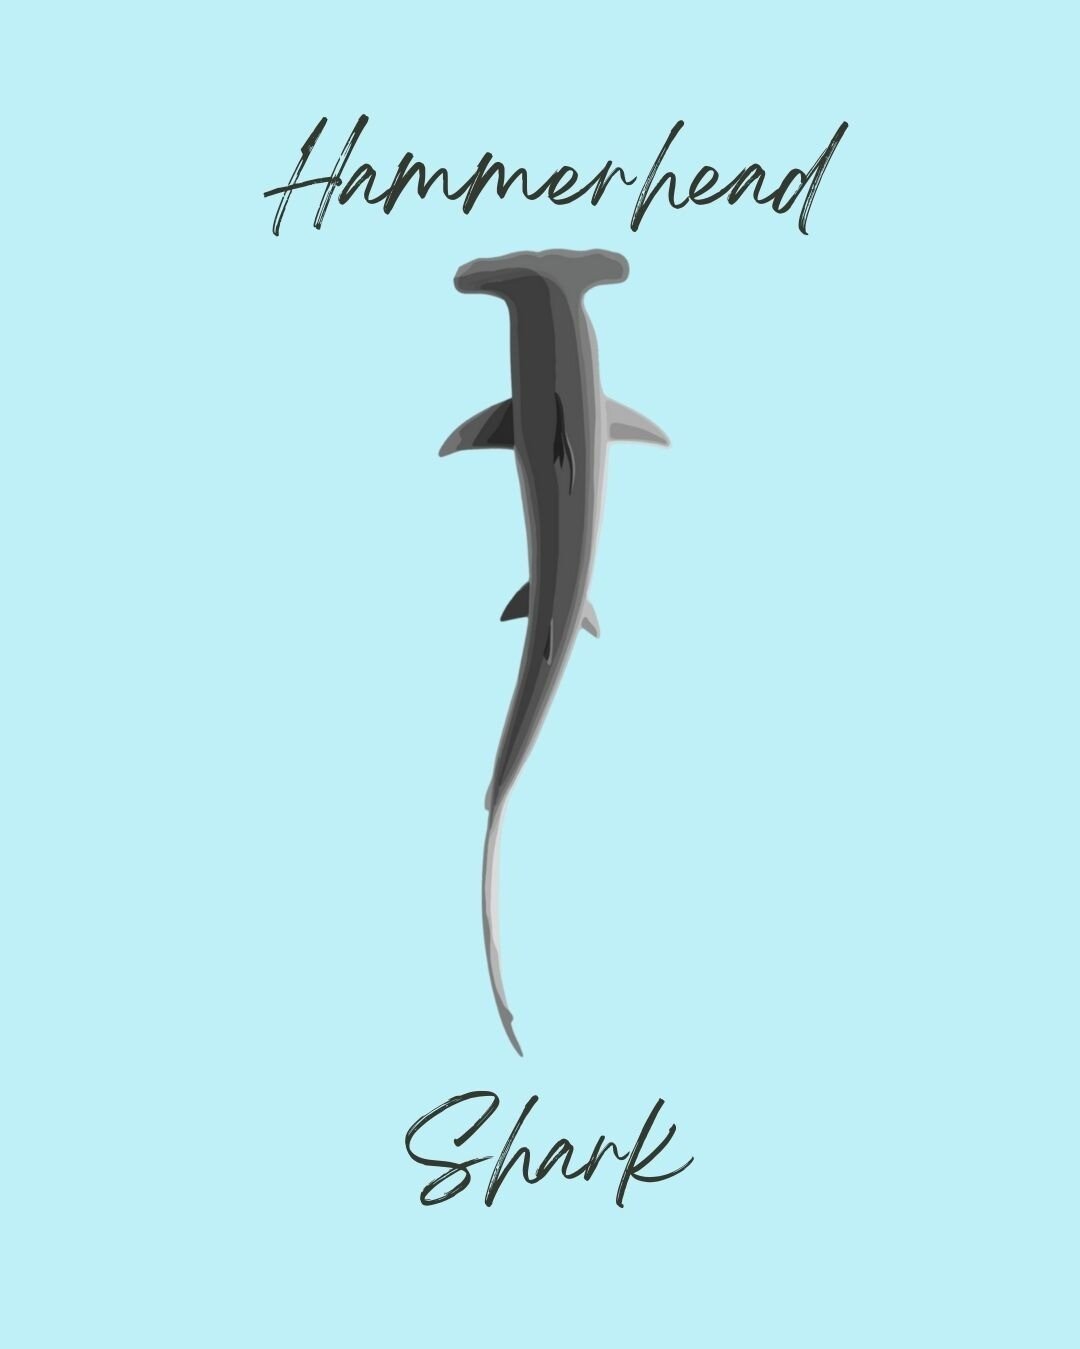 Let's find out how cool Hammerhead sharks are... 🦈😎

Give us a shout if you have see one!  And tell us all the details PLEASE!!